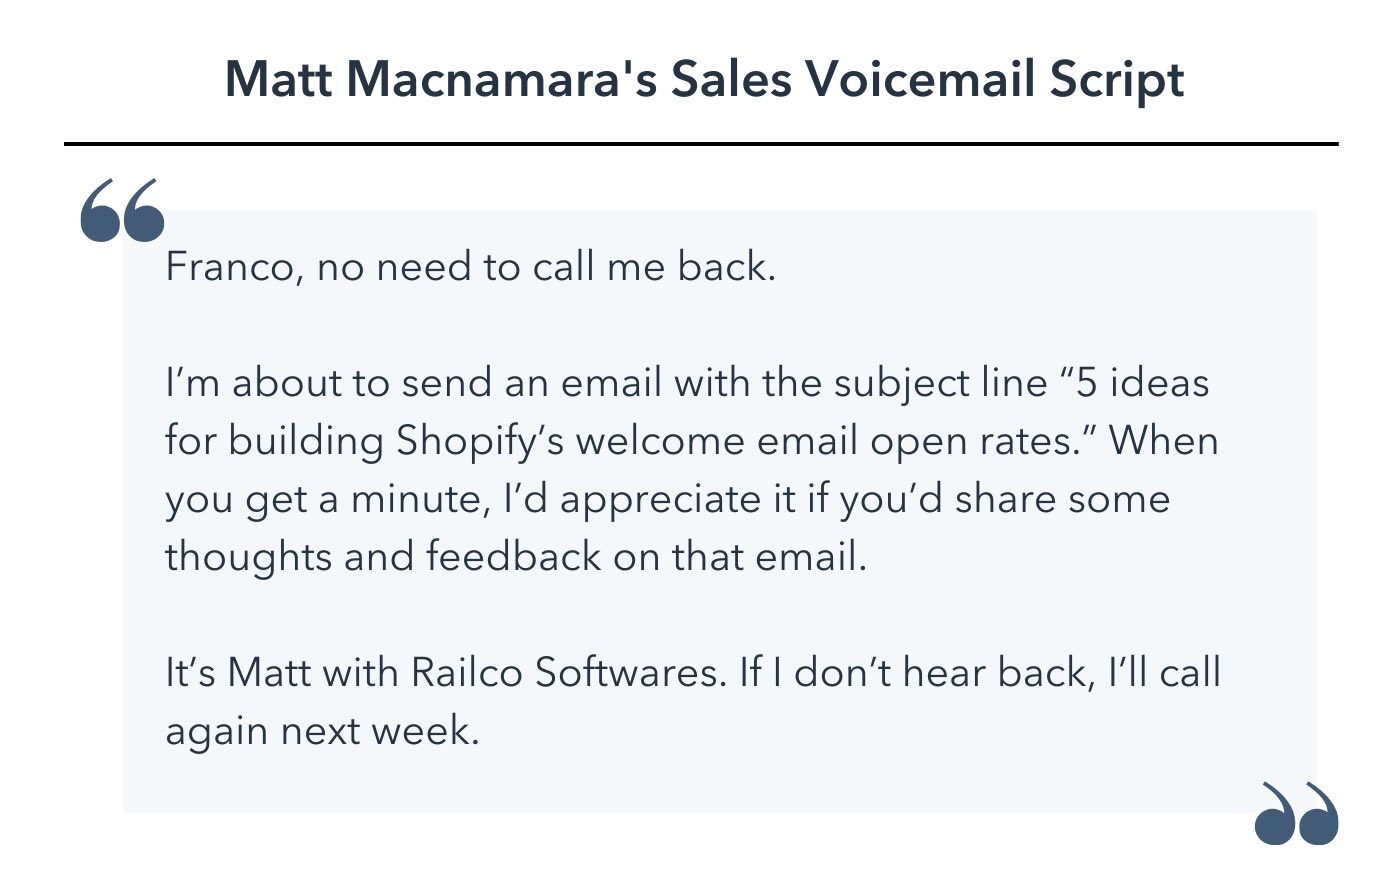 sales voicemail script template, Franco, no need to call me back. I’m about to send an email with the subject line “5 ideas for building Shopify’s welcome email open rates.” When you get a minute, I’d appreciate it if you’d share some thoughts and feedback on that email. It’s Matt with Railco Softwares. If I don’t hear back, I’ll call again next week.